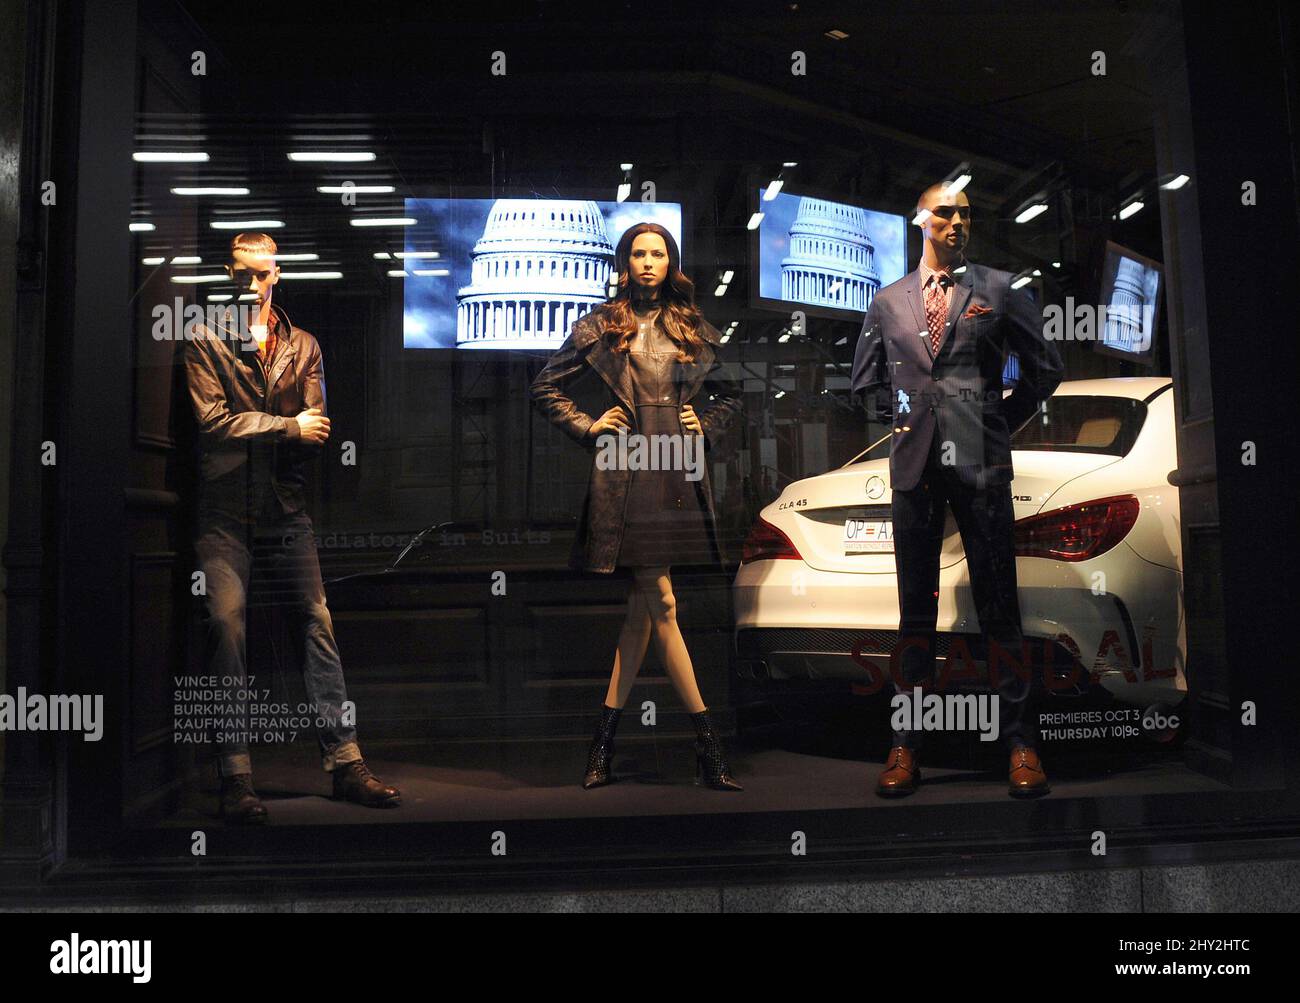 A general view of the 'Scandal' window display at Saks Fifth Avenue in New York. Stock Photo